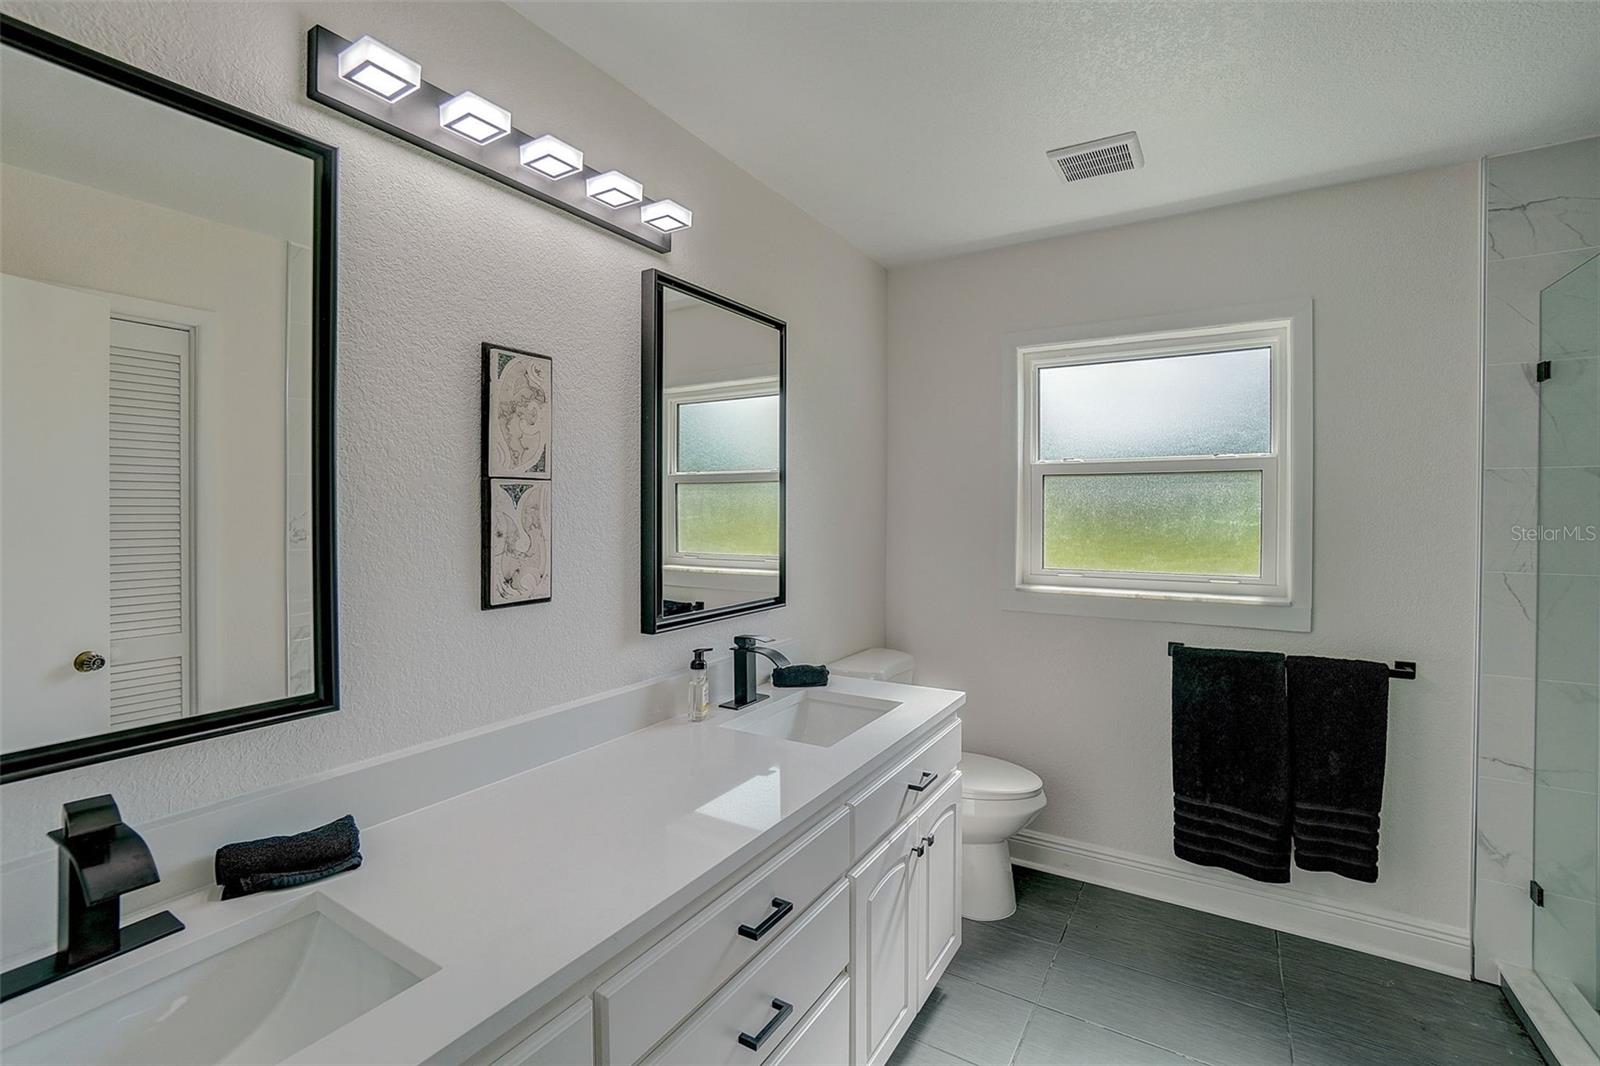 COMPLETELY REMODELED BATHROOM WITH DUAL SINKS AND MODERN SHOWER